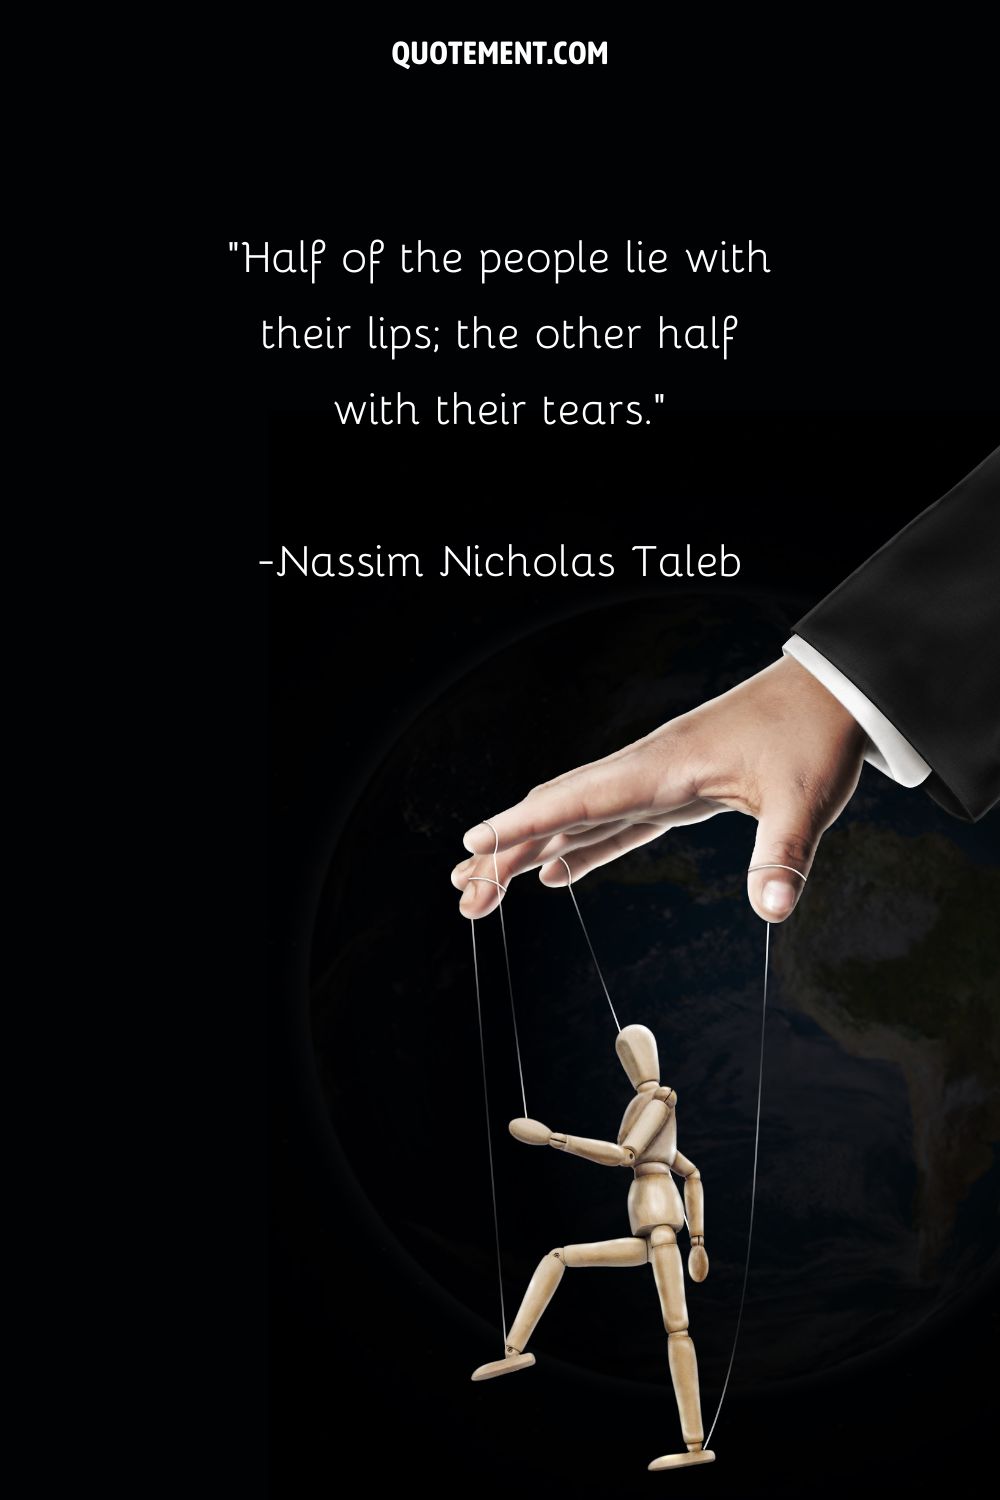 hand holding a marionette representing quote on manipulation